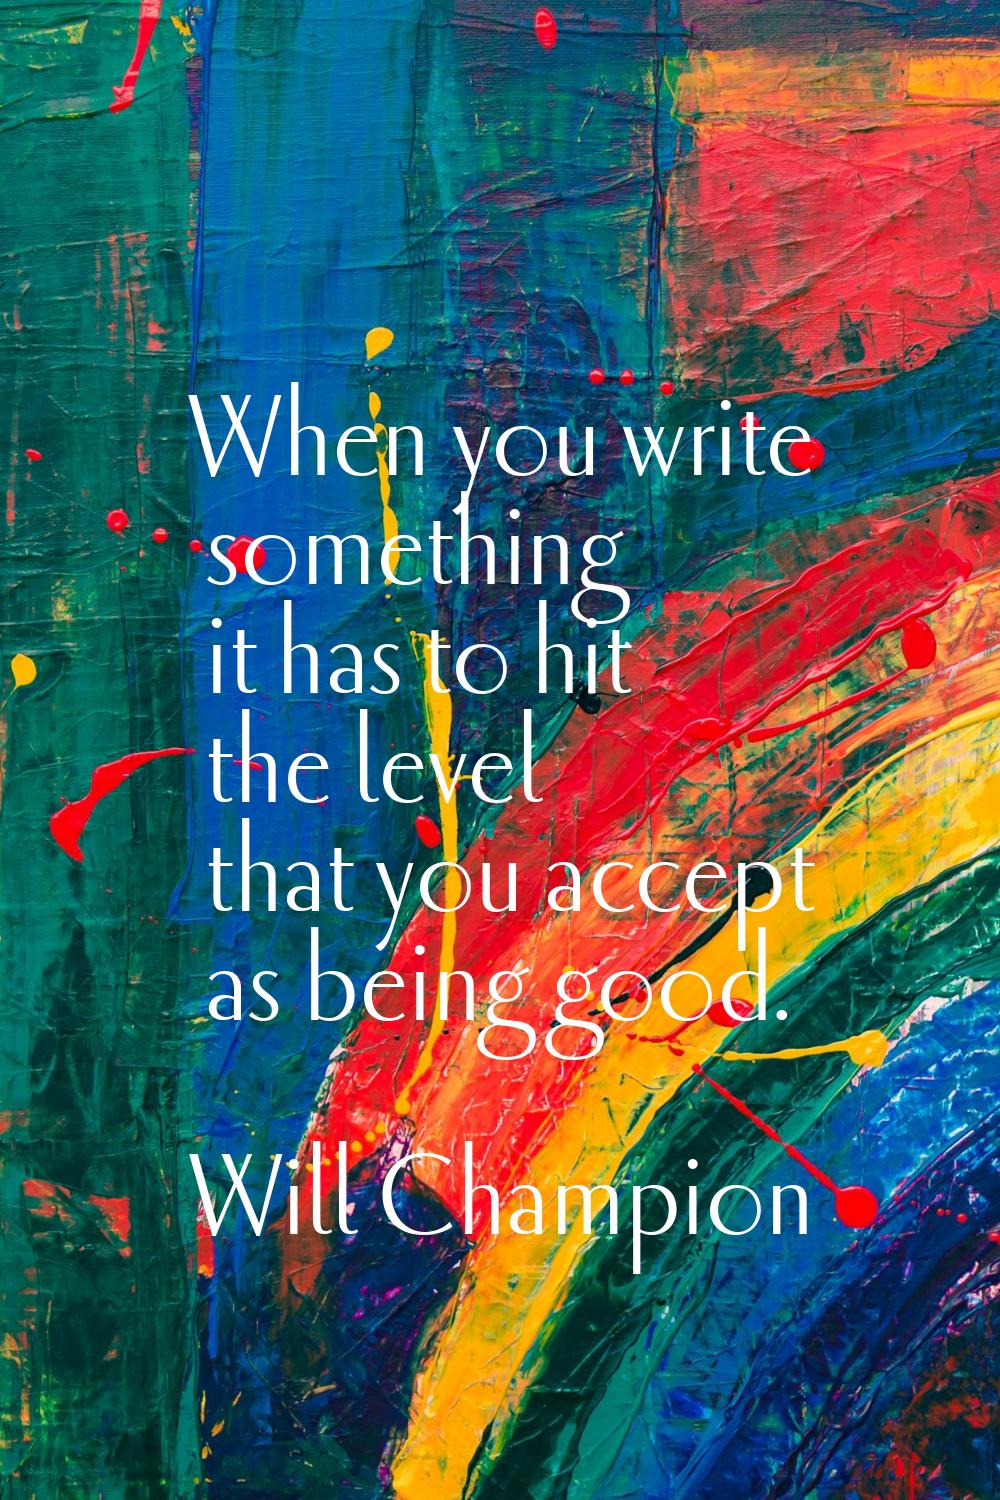 When you write something it has to hit the level that you accept as being good.